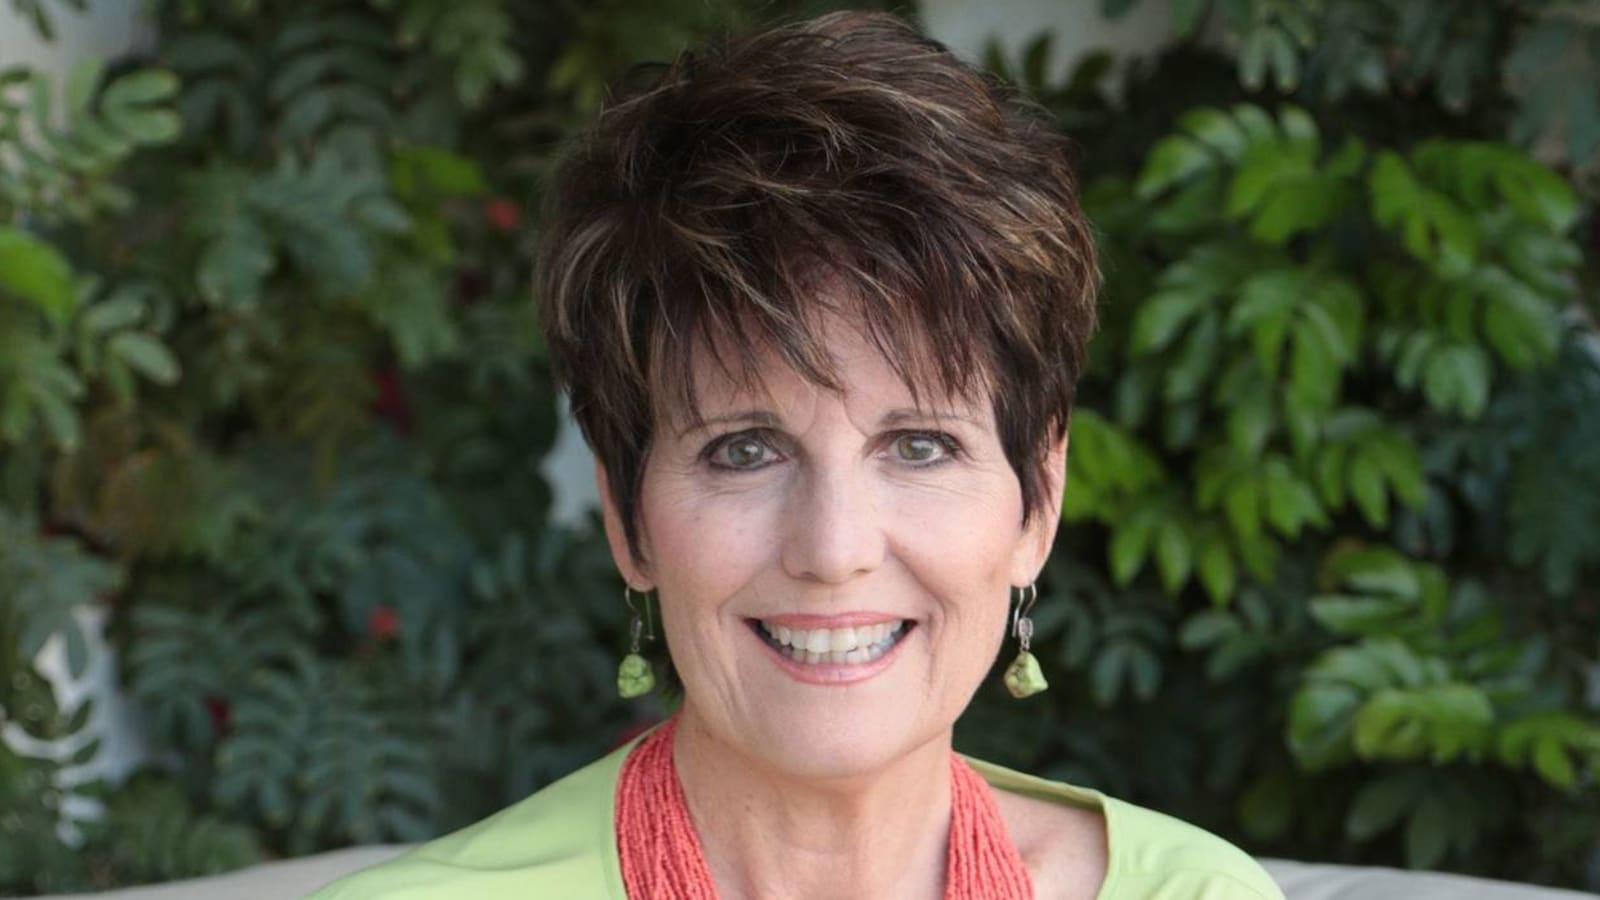 Lucie Arnaz, daughter of Desi Arnaz and Lucille Ball, has a specific 'Being the Ricardos' critique